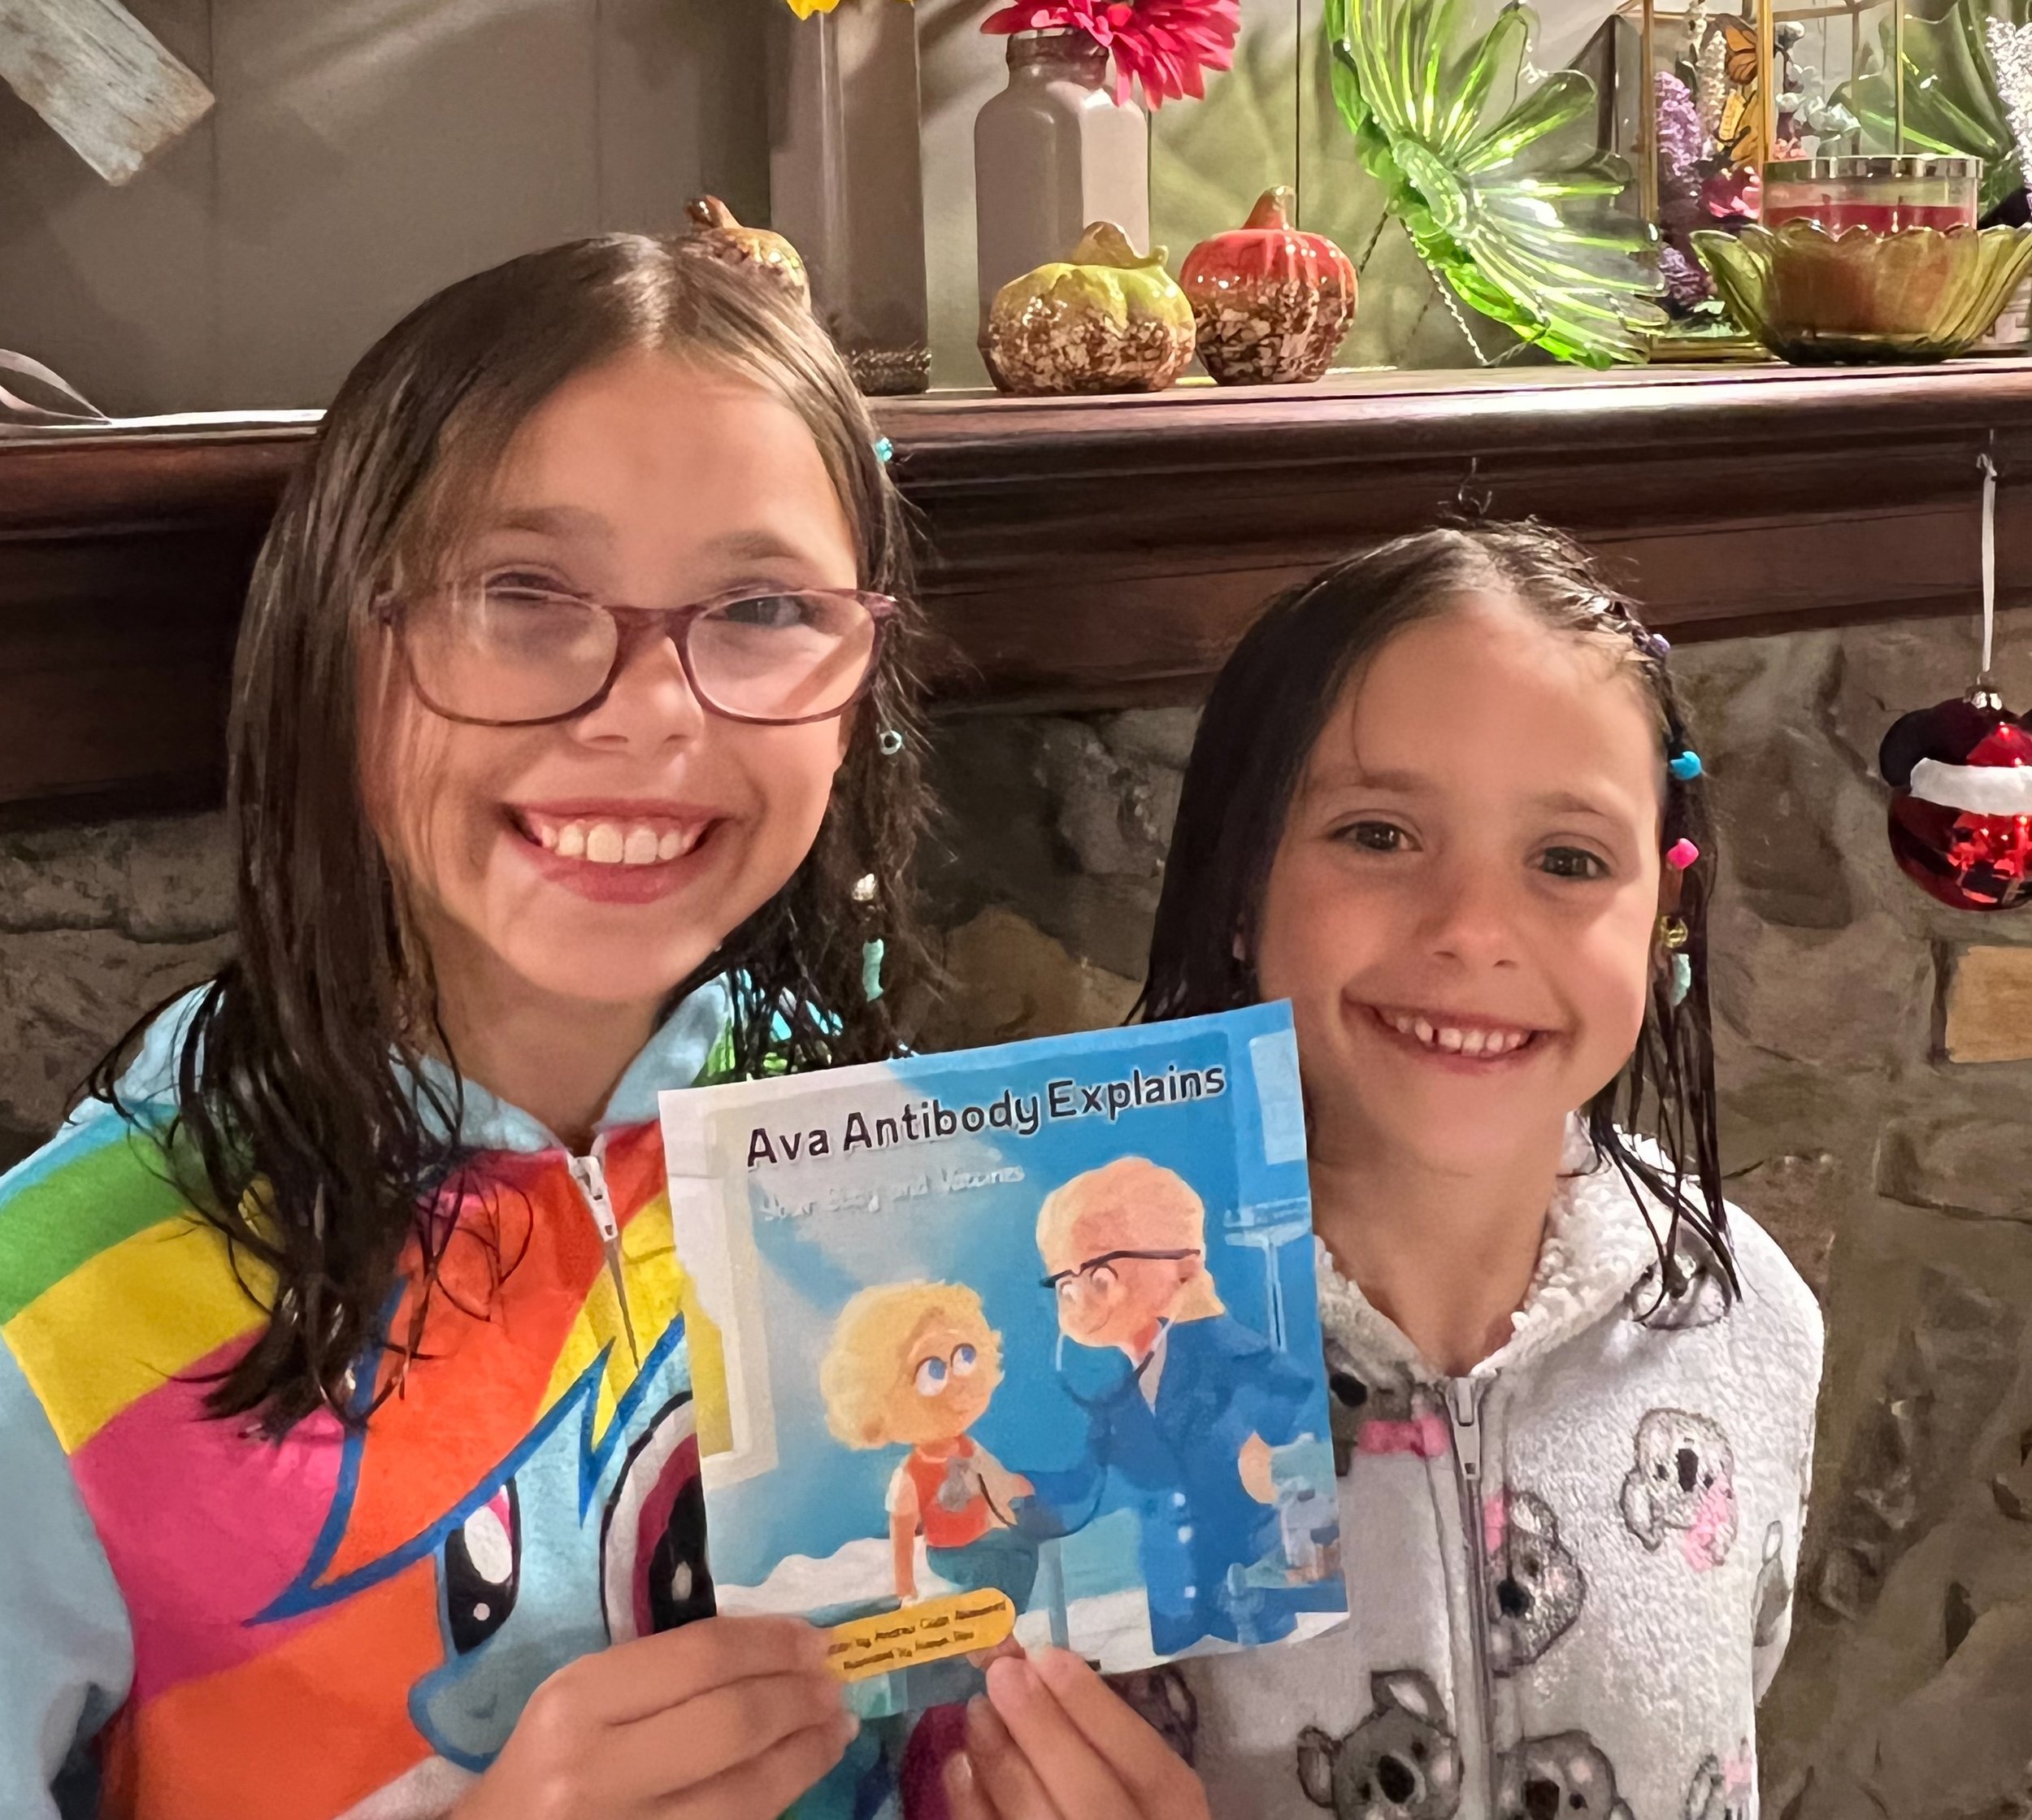  Ava Antibody Explains – a children’s book reviewed by Avery and Ariana (2022) Read it at:  https://www.polionetwork.org/archive/pzovoenx7bdmdauq9uytwv94u4yjug-cznk5  